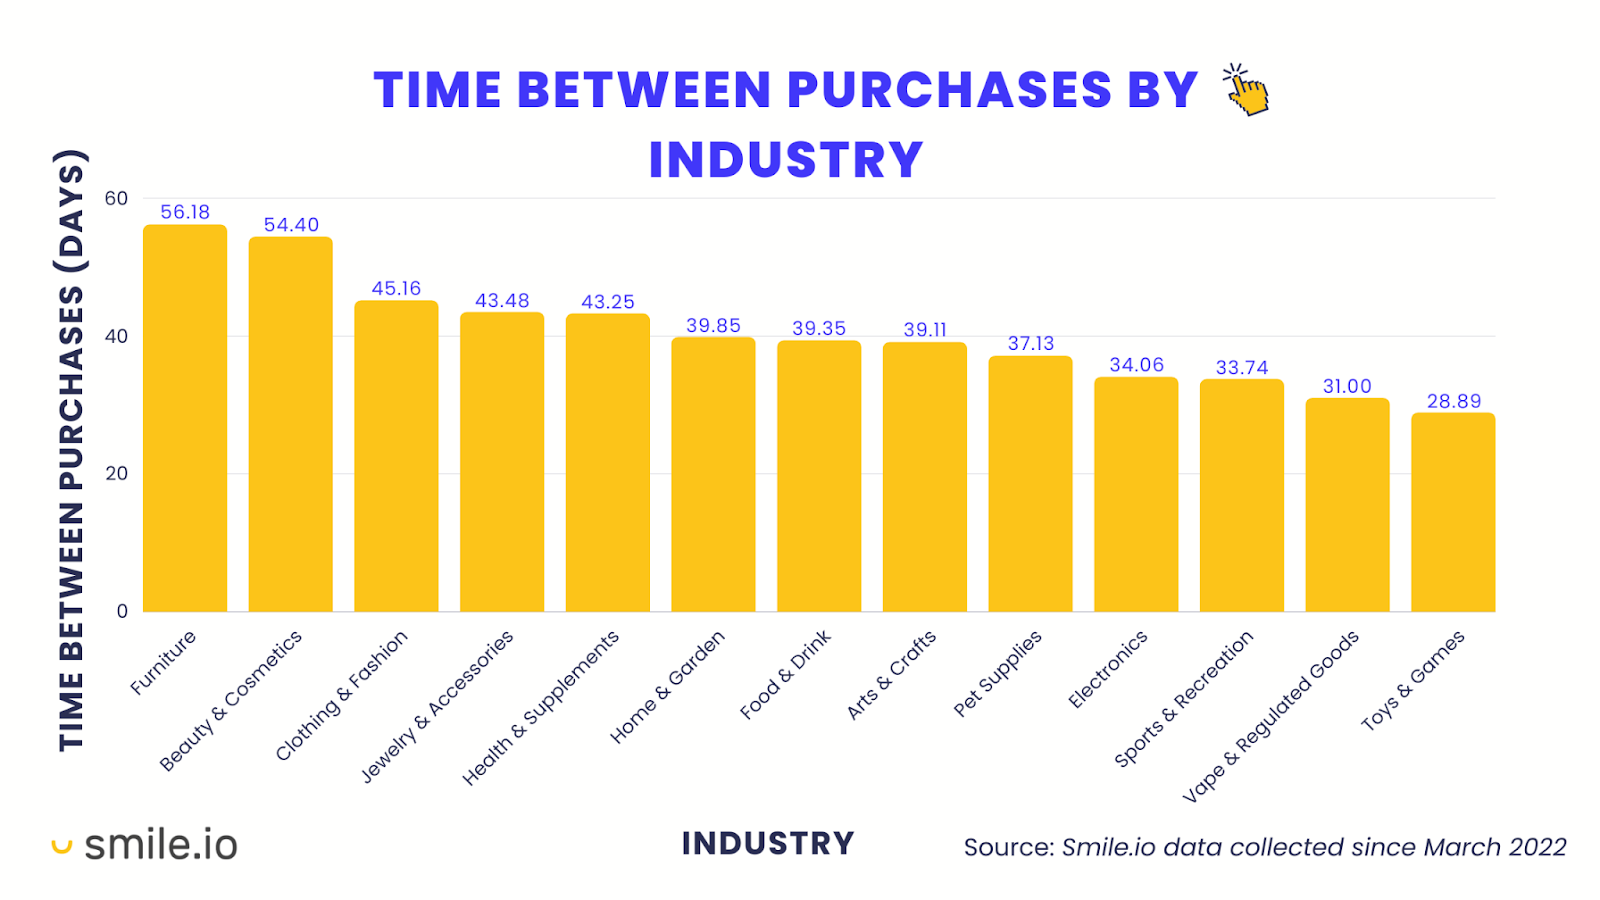 Increase Purchase Frequency–A bar chart displaying the time between purchases for 13 different industries collected from 100K Smile merchants from March 2022 to March 2023. 